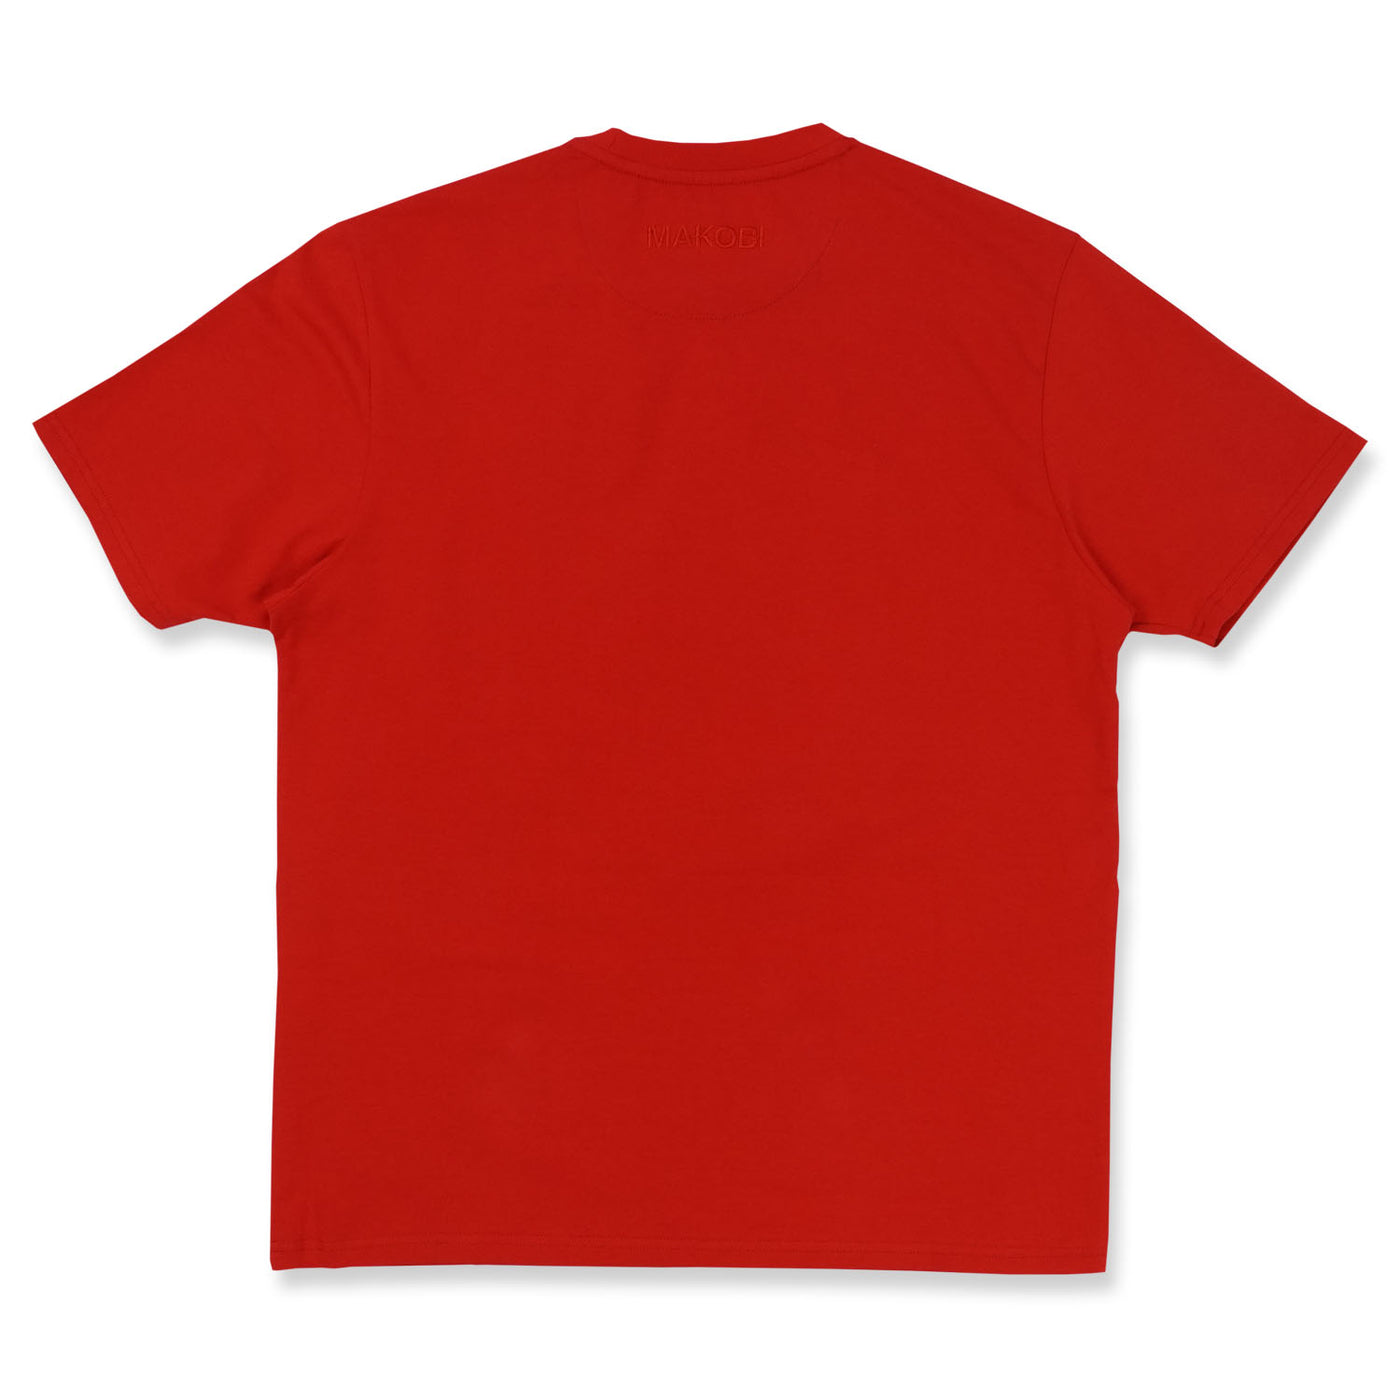 M328 Loose Change Tee - Red